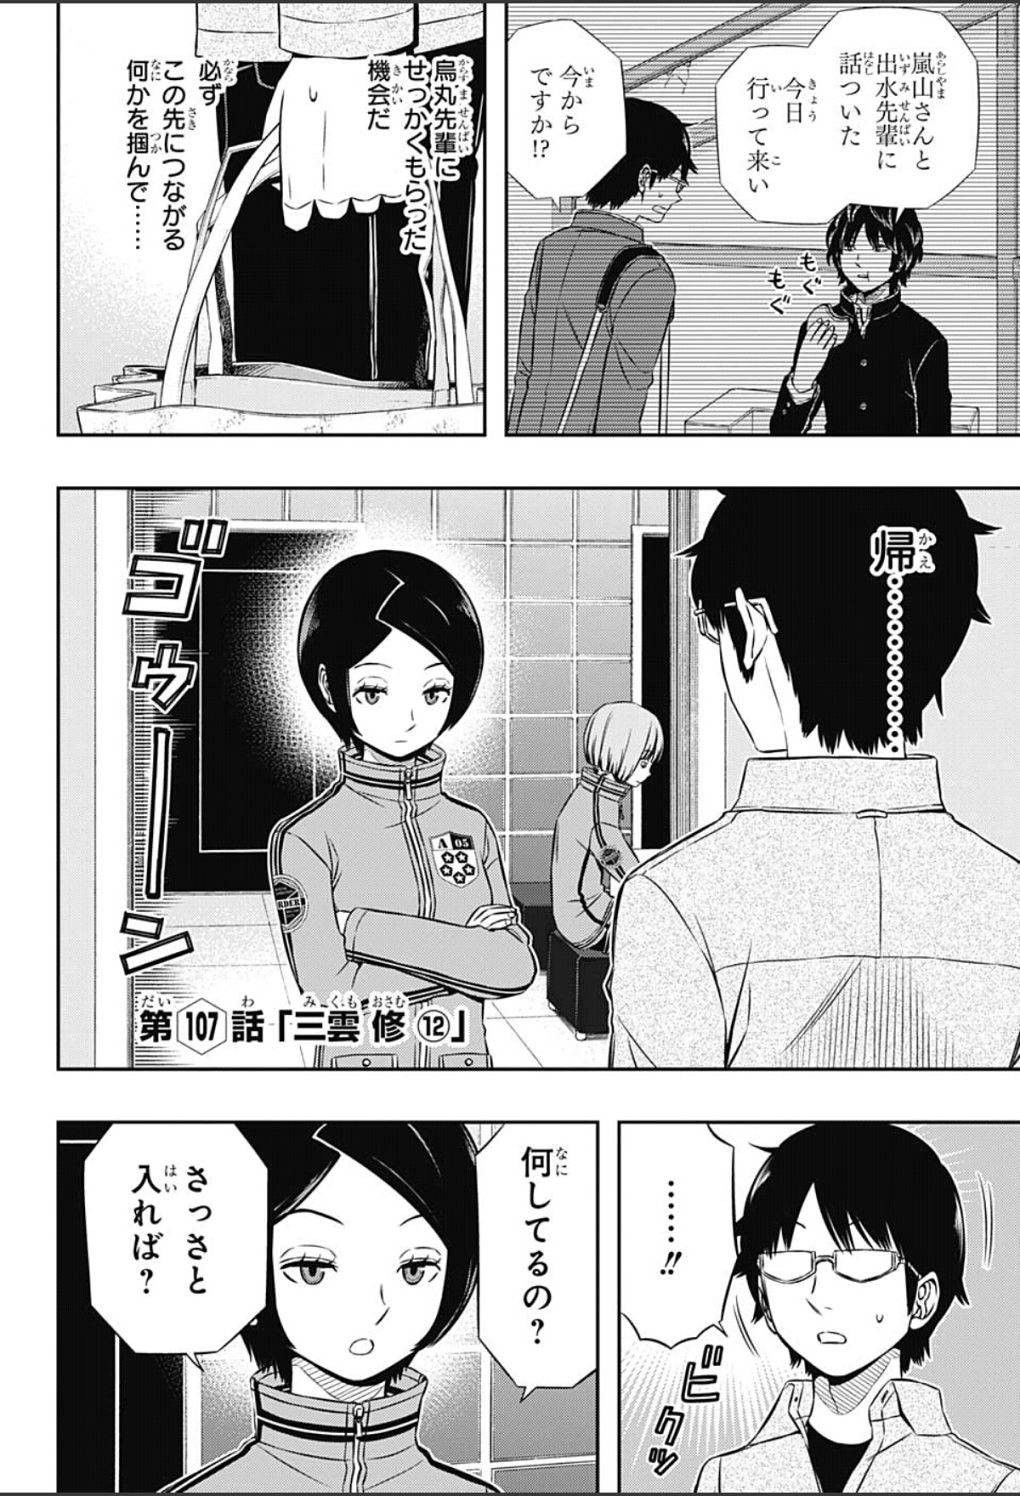 World Trigger - Chapter 107 - Page 2